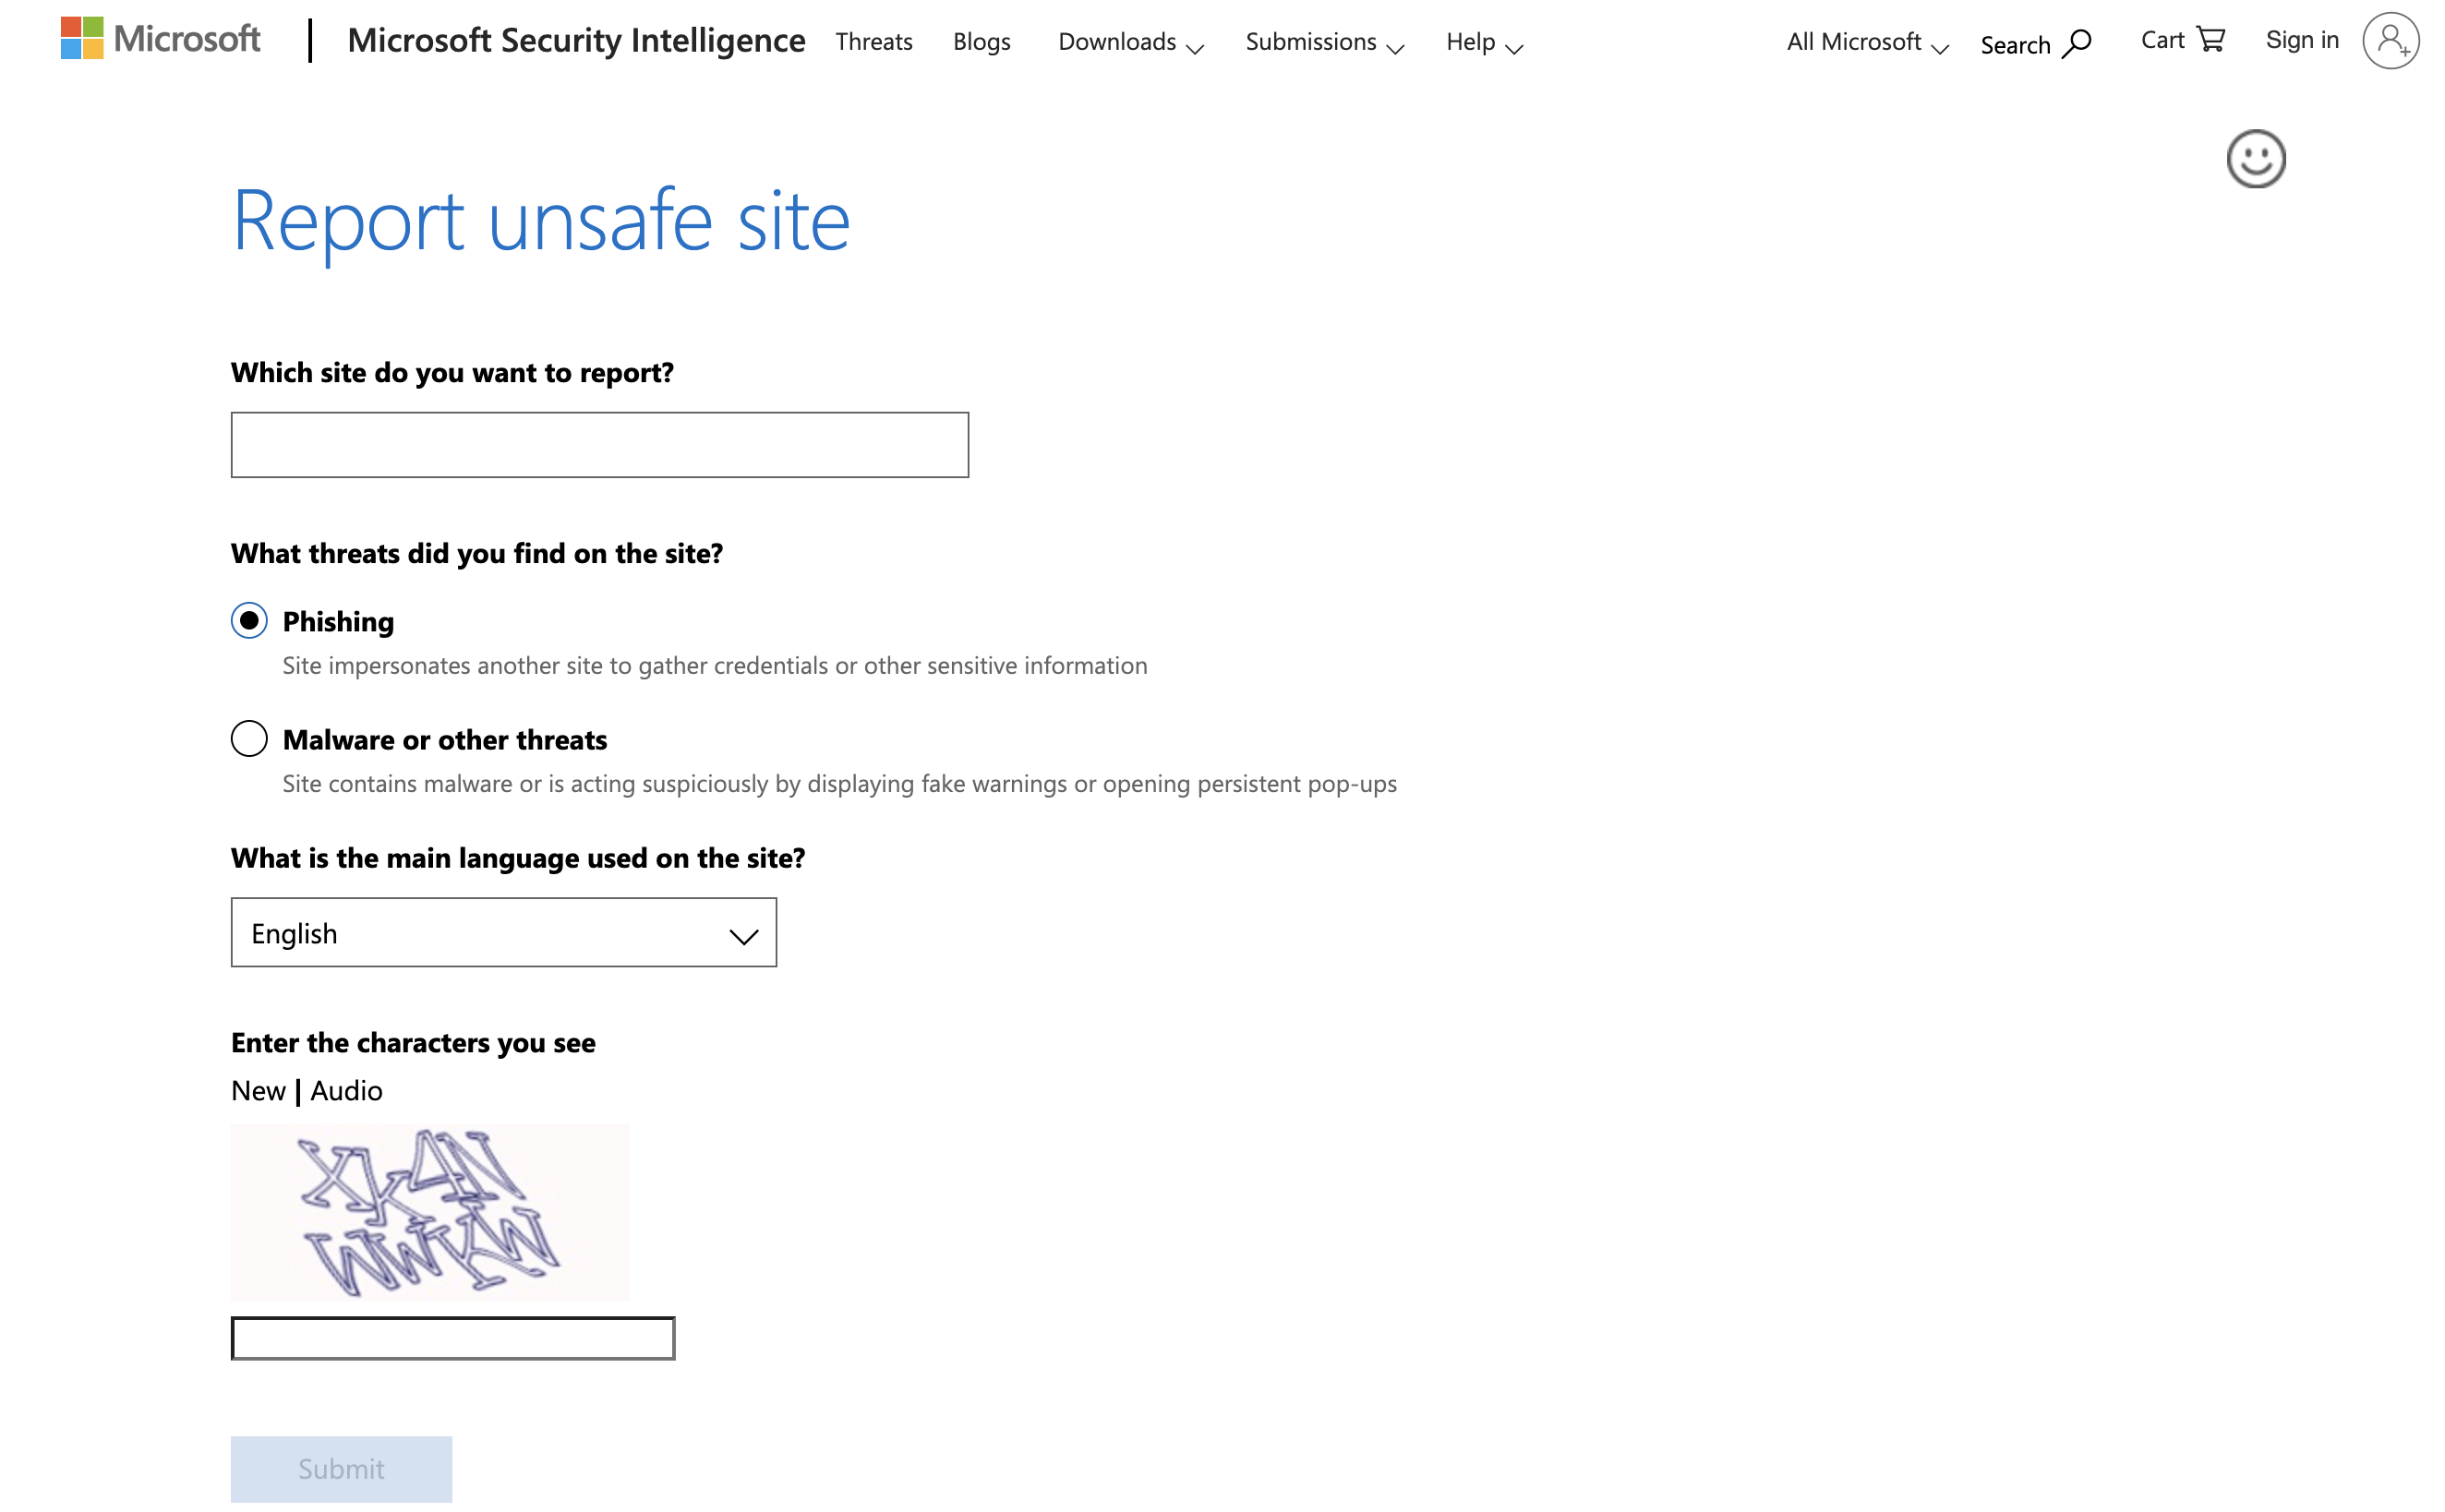 Microsoft_Report unsafe site.png